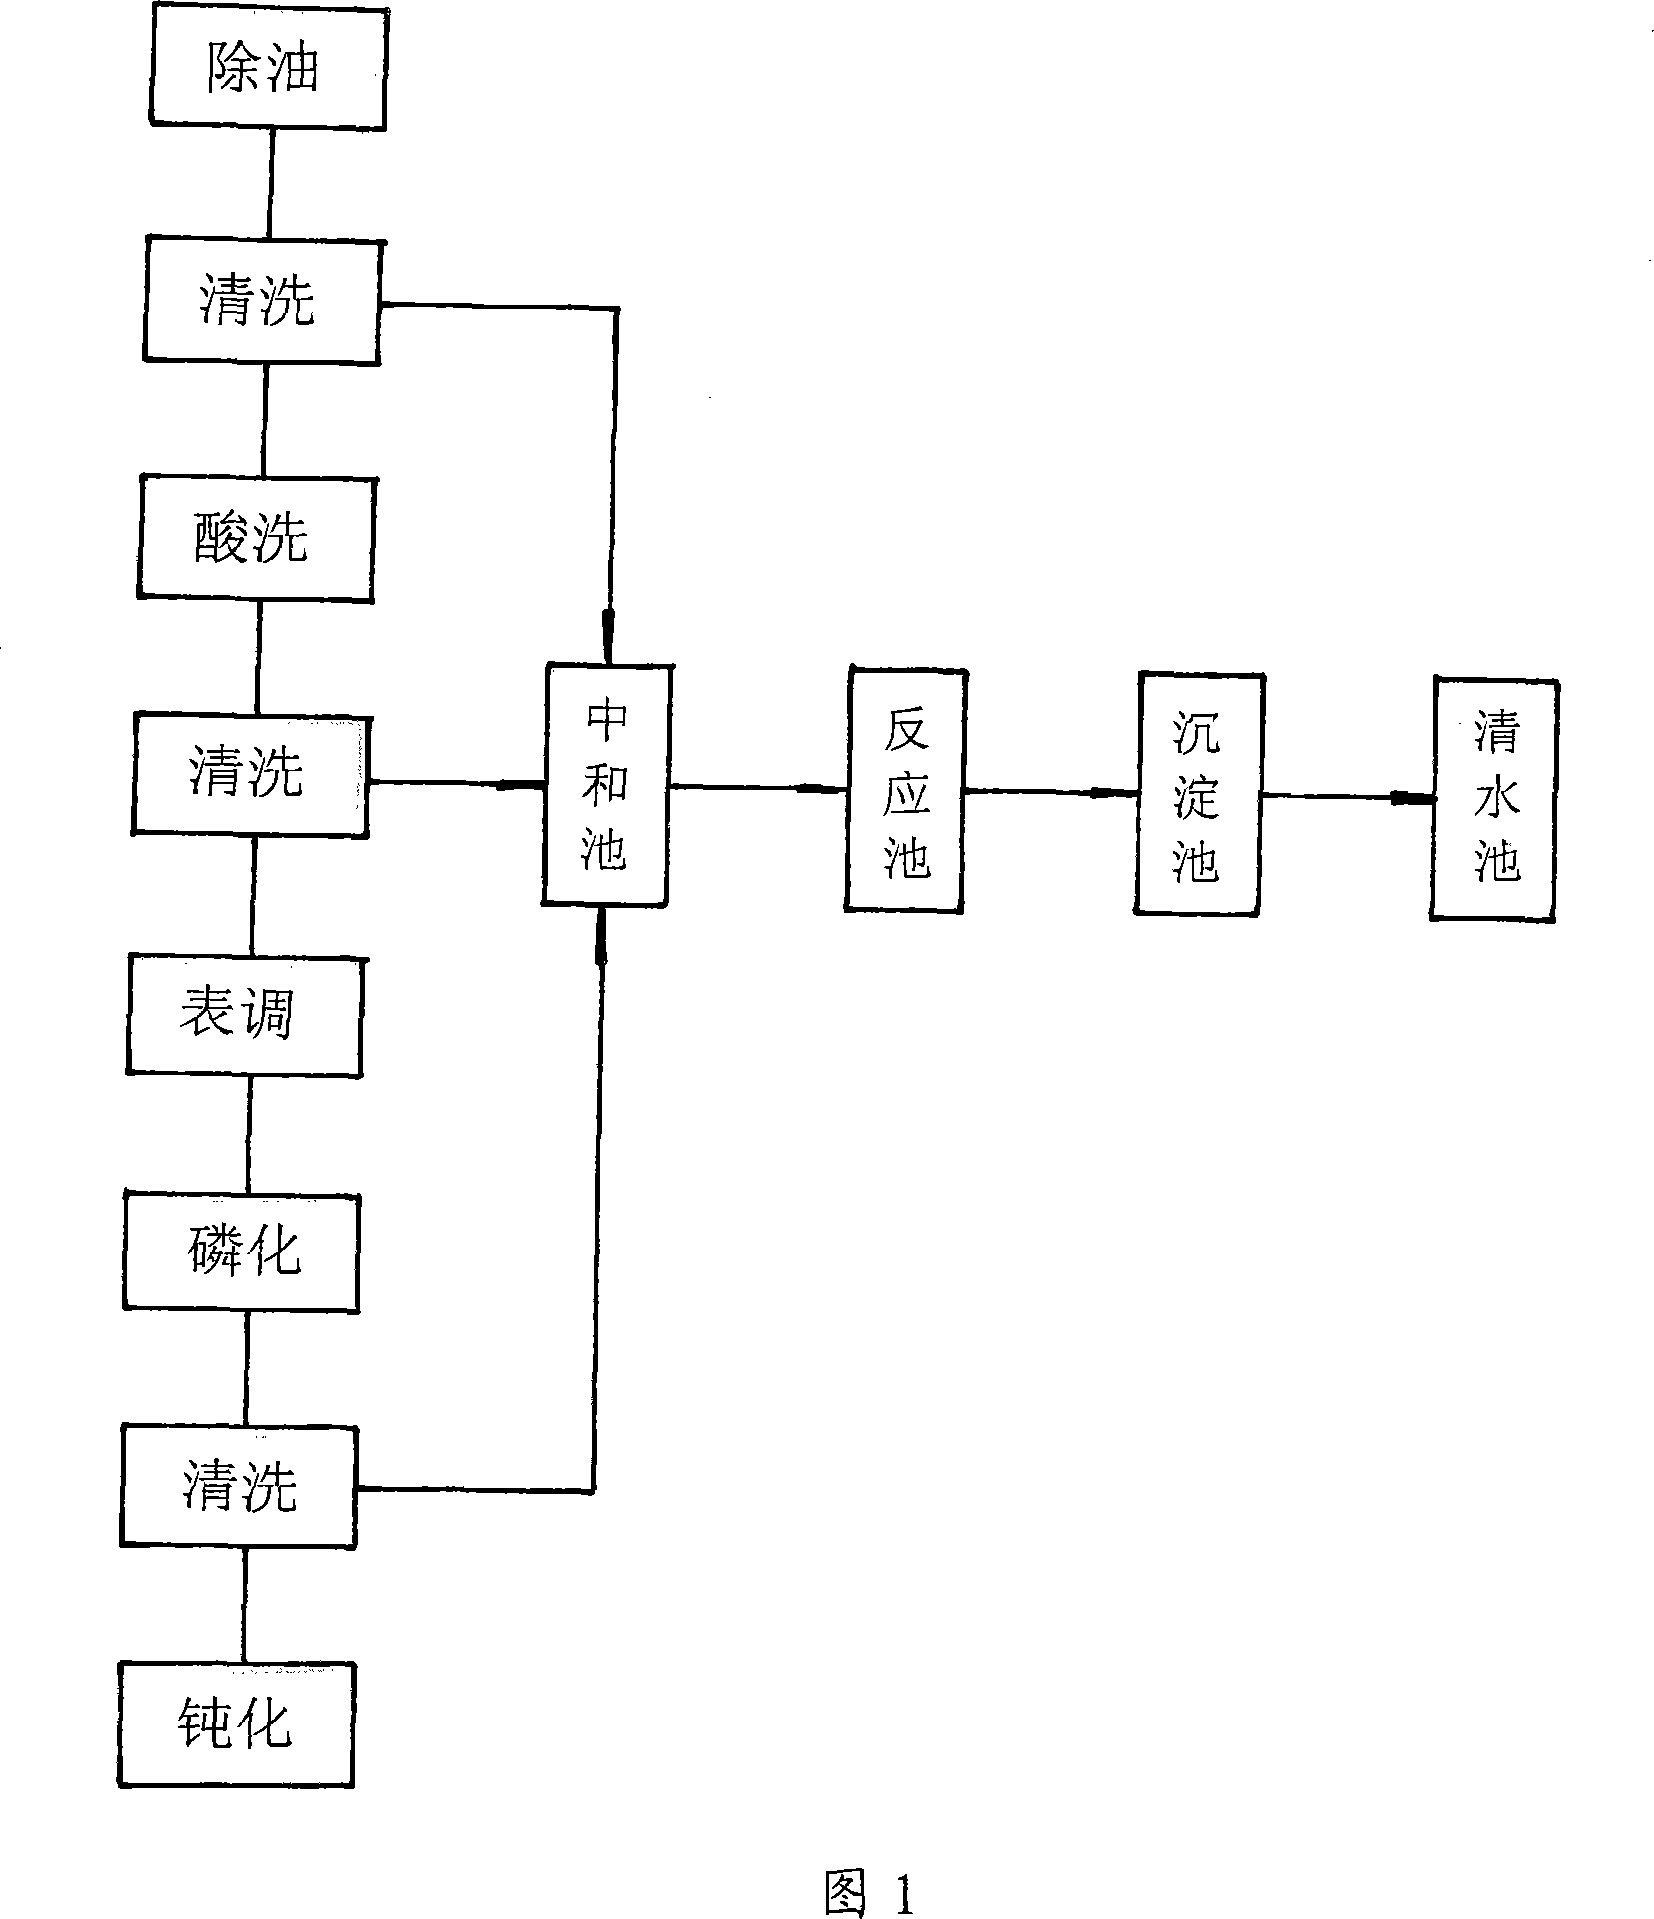 Process for reclaiming and treating phosphorization sewage